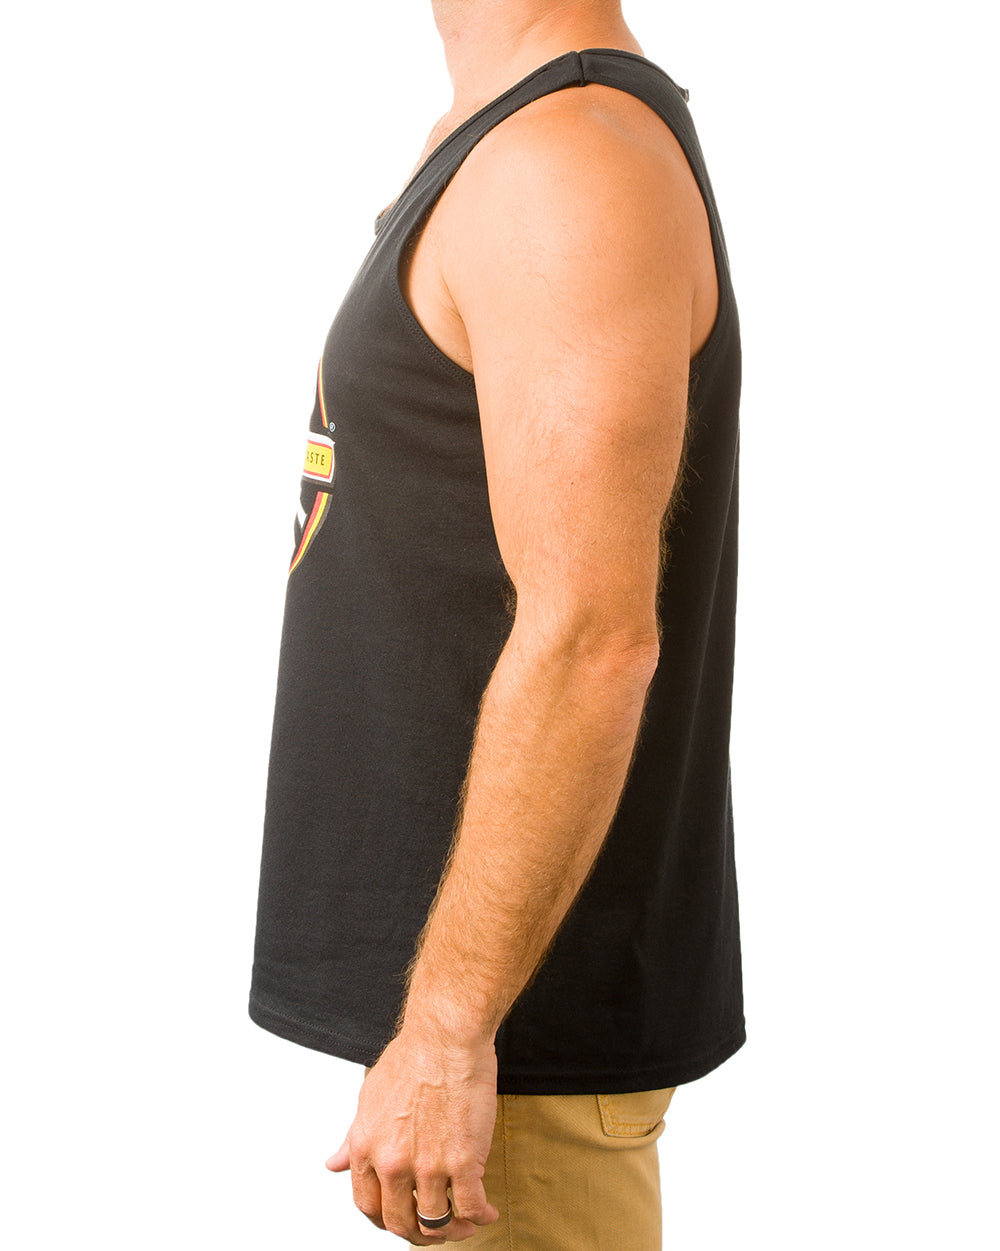 Waikato Draught Singlet -  Beer Gear Apparel & Merchandise - Speights - Lion Red - VB - Tokyo Dy merch